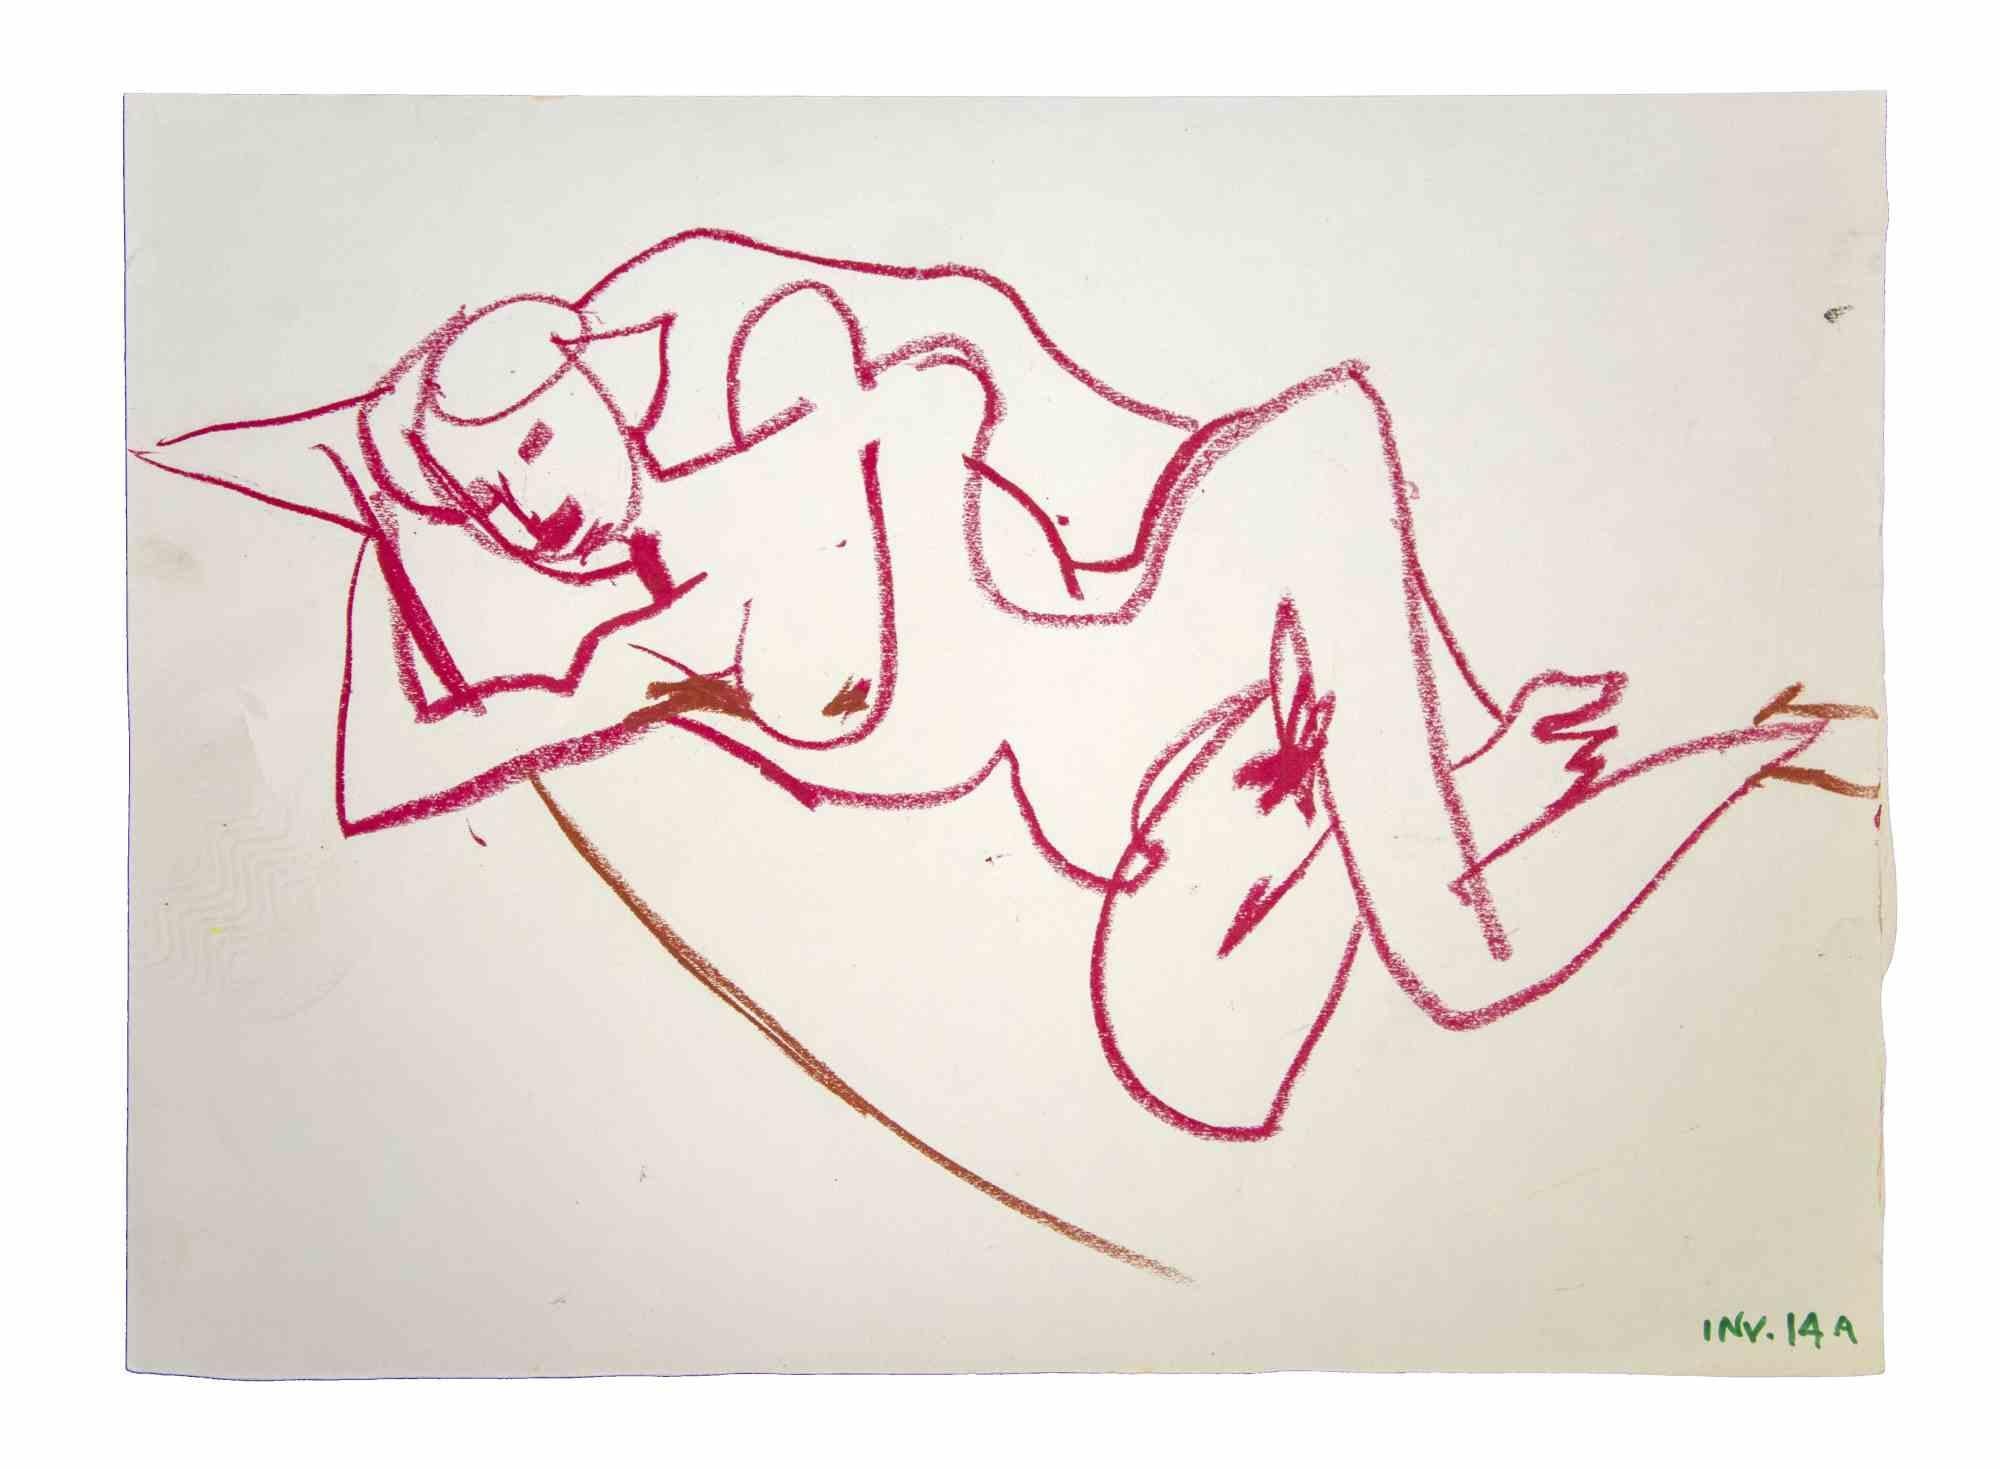 Reclined Nude is an original artwork realized in the 1970s by the Italian Contemporary artist  Leo Guida  (1992 - 2017).

Original oil pastel drawing on paper.

Good conditions.

Leo Guida  (1992 - 2017). Sensitive to current issues, artistic